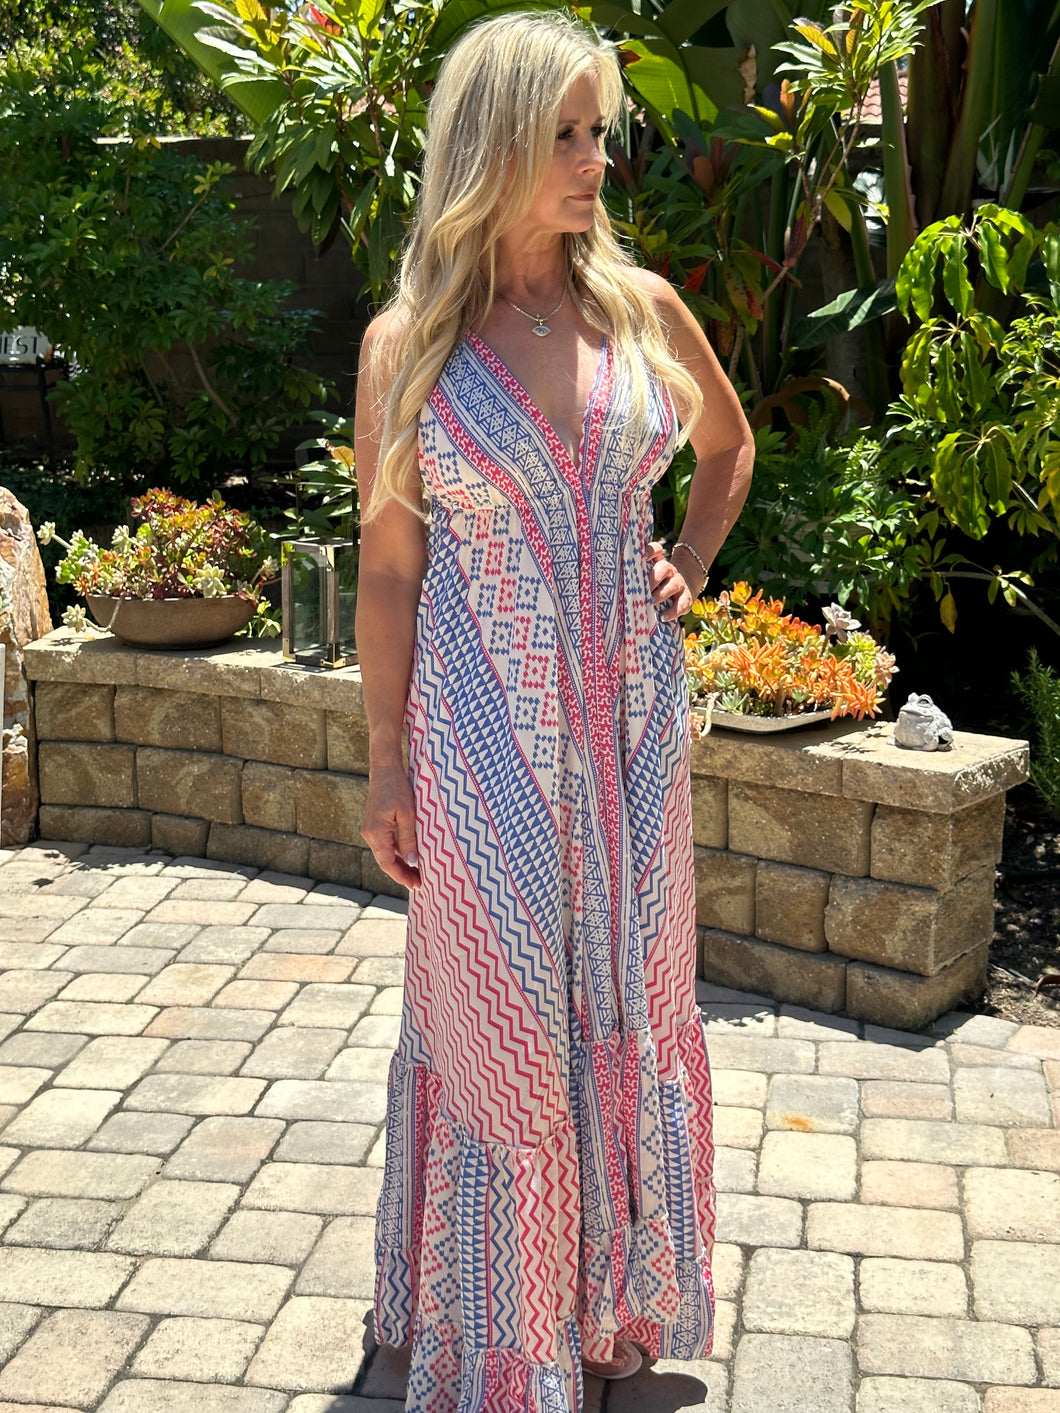 One of our top selling dresses is back!  You will receive endless compliments in this timeless beautiful boho dress.  It's perfect for spring, summer or warm fall days .  It's lightweight, colorful, fun and sexy with a plunge neckline and open back. Multi-color print in Barbie pink, royal blue and white. Made by Karma Highway.   ONE SIZE FITS MOST.